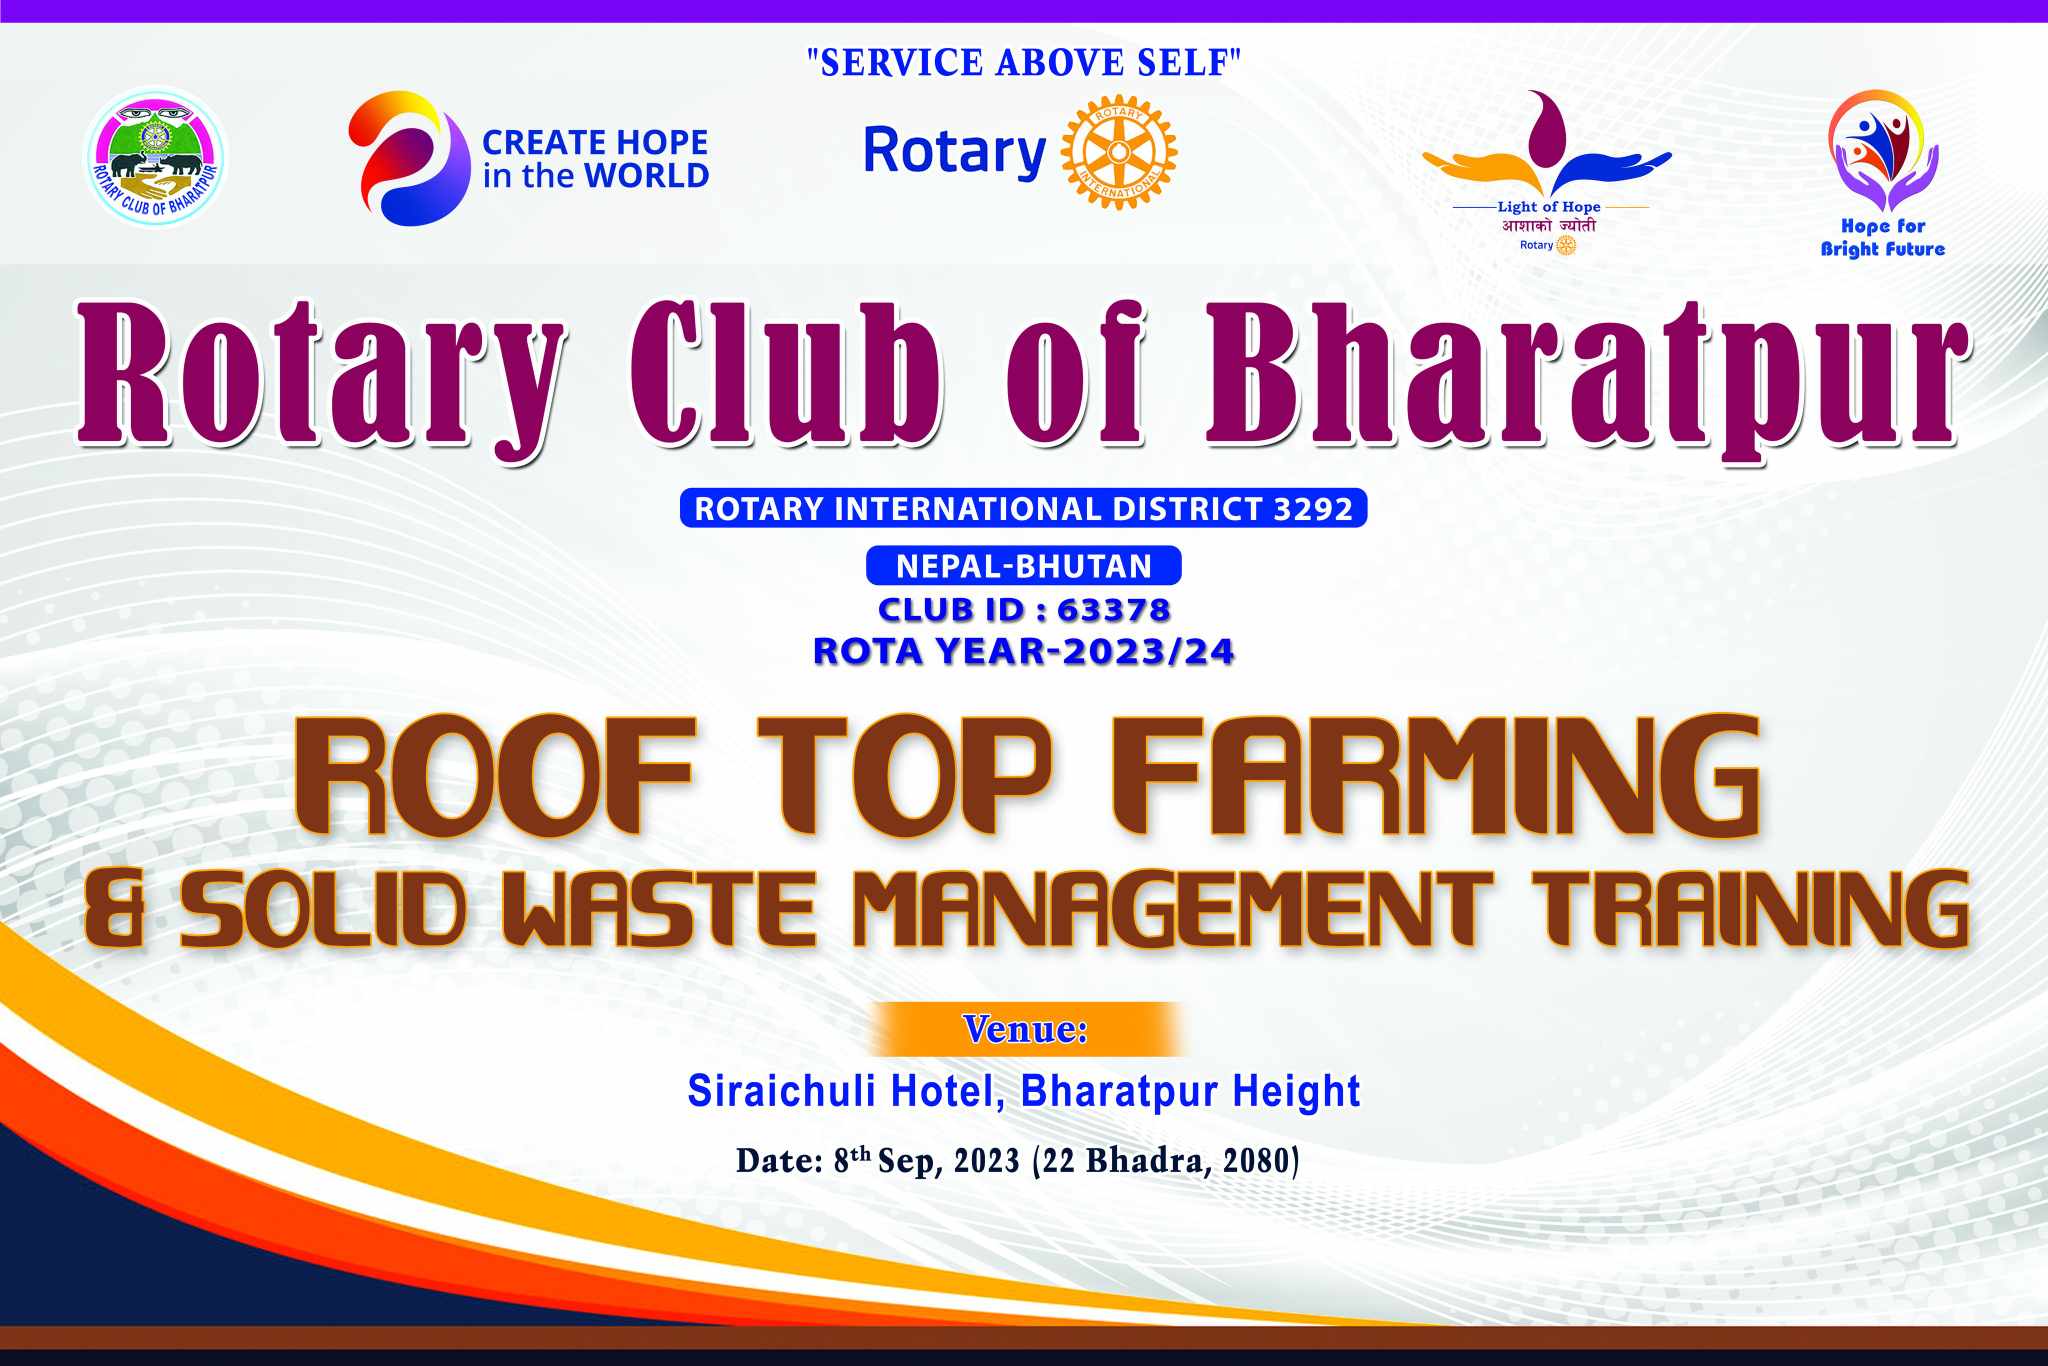 Roof top farming and solid waste management training